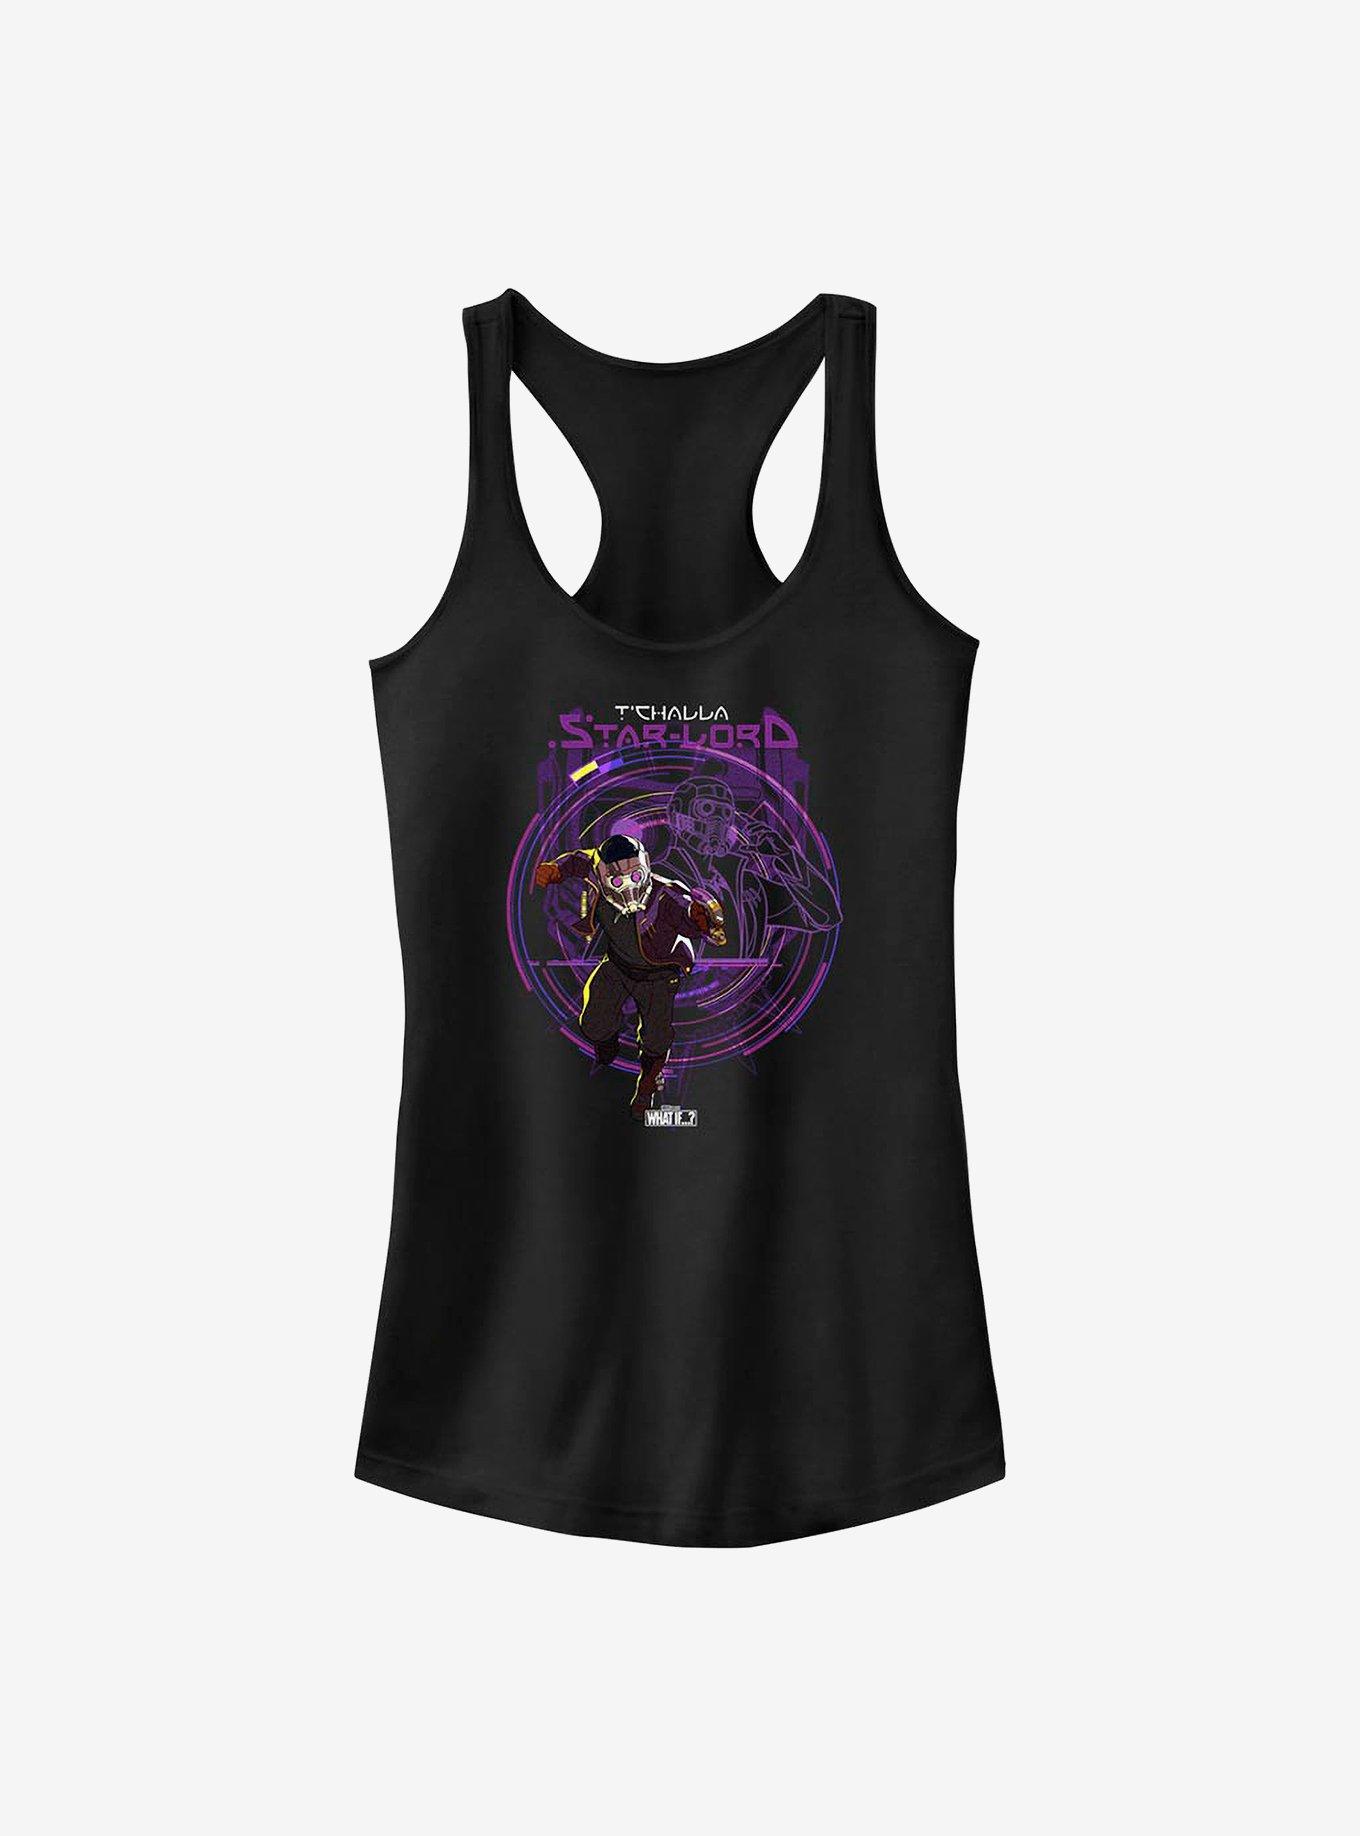 Marvel What If...? T'Challa Star-Lord Girls Tank, BLACK, hi-res